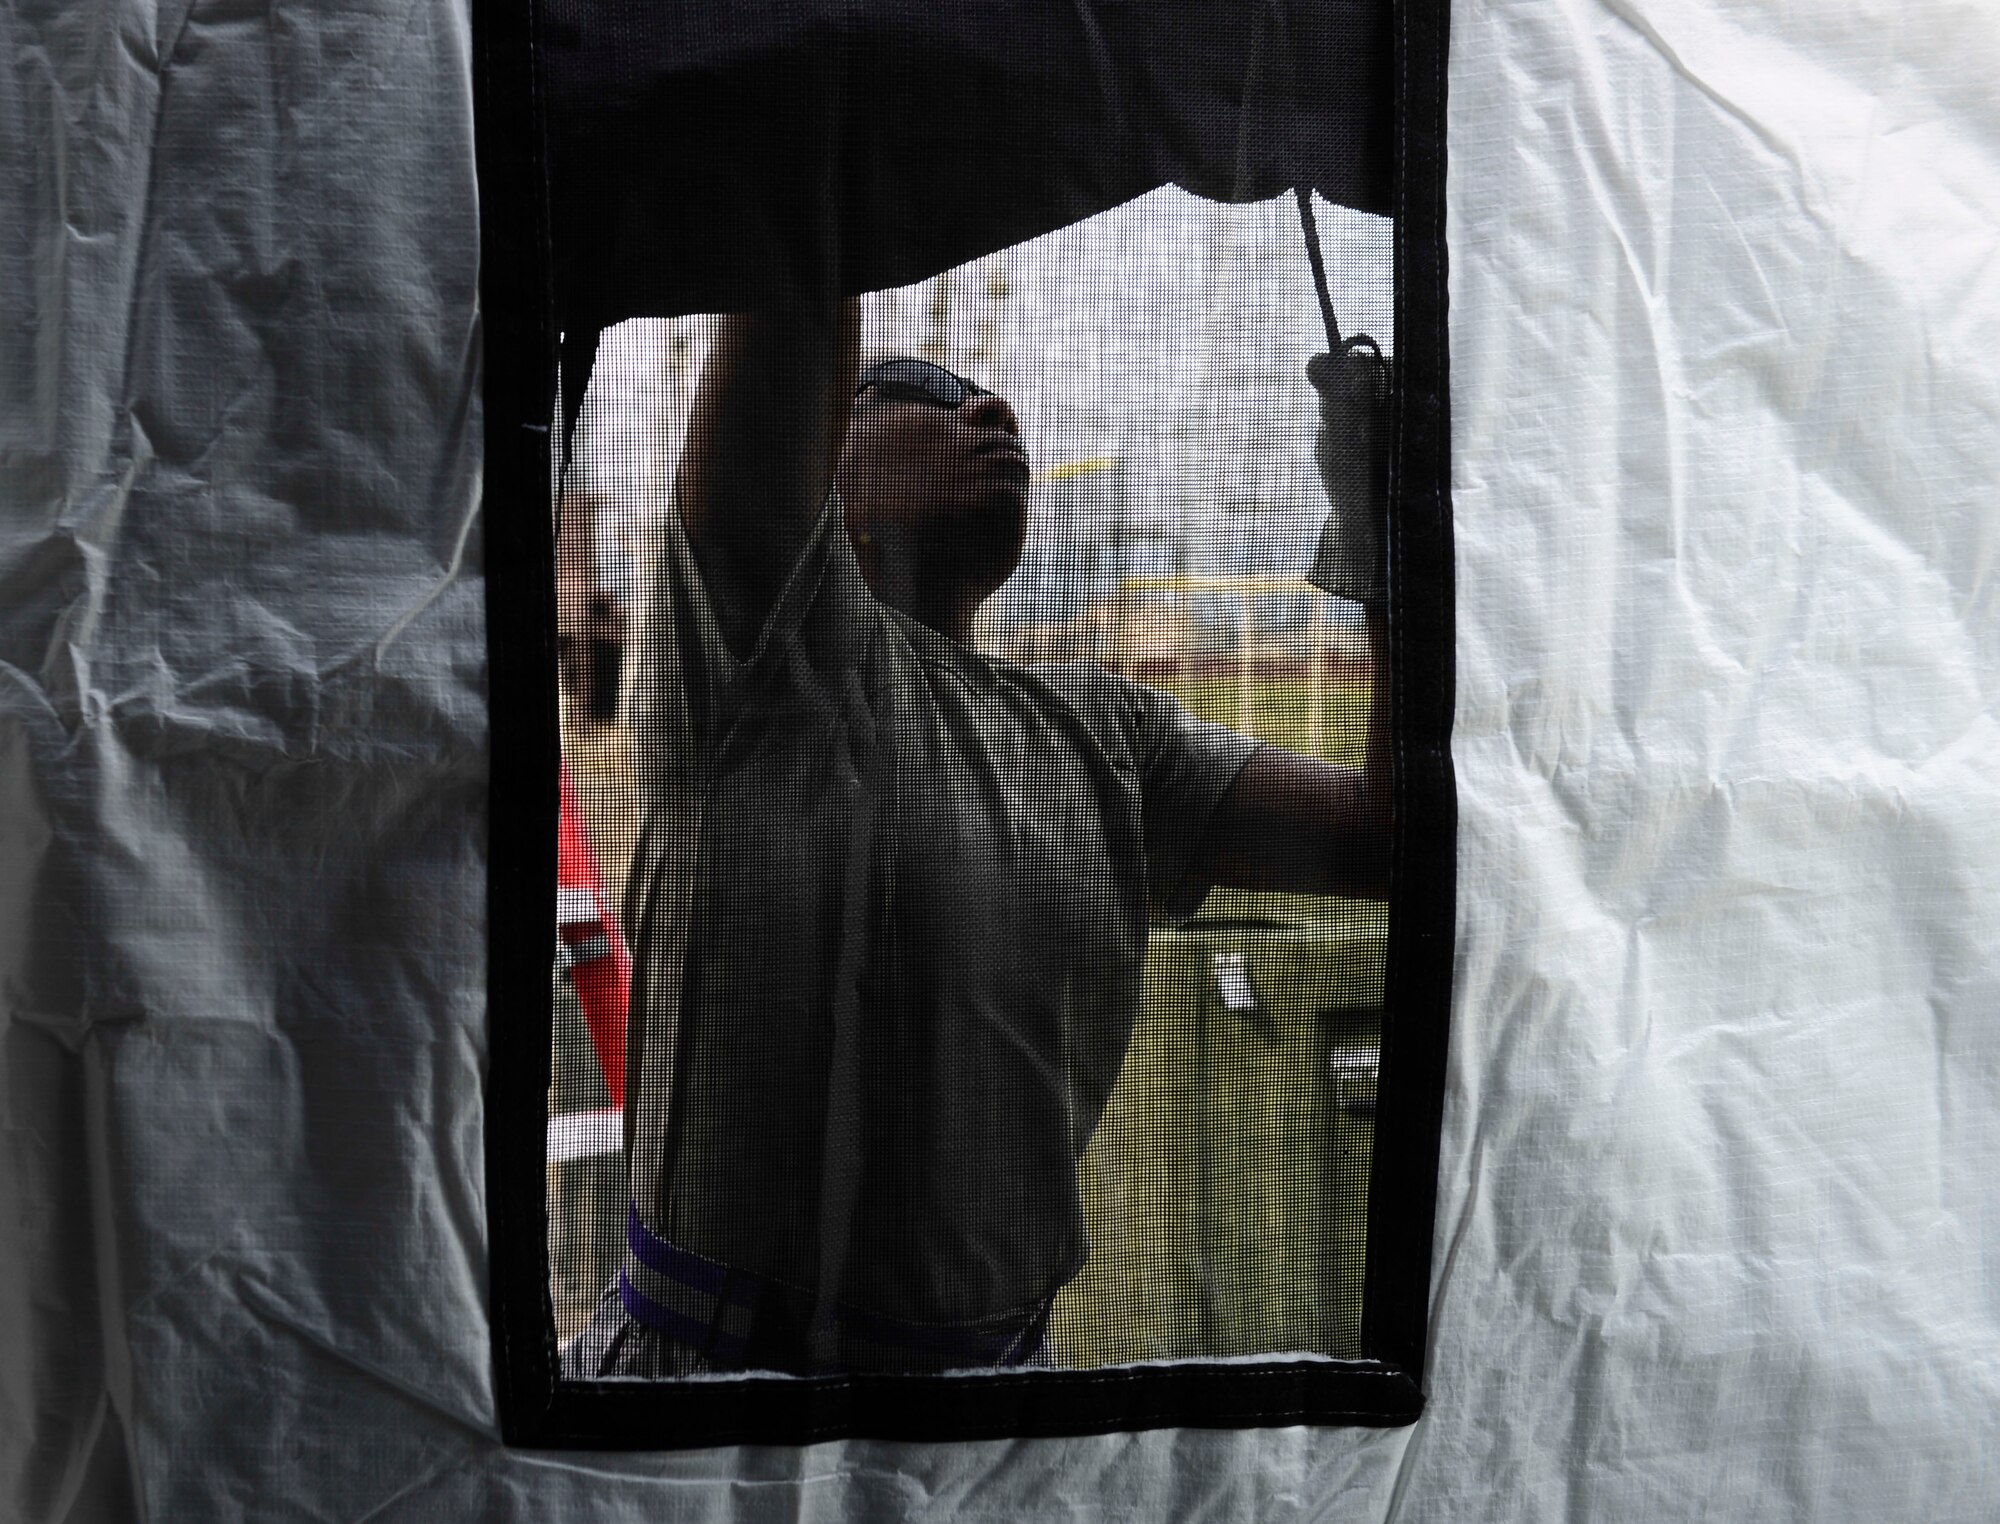 An Airman from the 374th Medical Group rolls up a window cover on an Expeditionary Medical Support tent at Yokota Air Base, Japan, May 14, 2014.  An EMEDS team has a anesthesiologist, orthopedic surgeon, emergency room doctor, operating room nurse and a general surgeon to treat patients in a contingency. (U.S. Air Force photo by Airman 1st Class Meagan Schutter/Released)